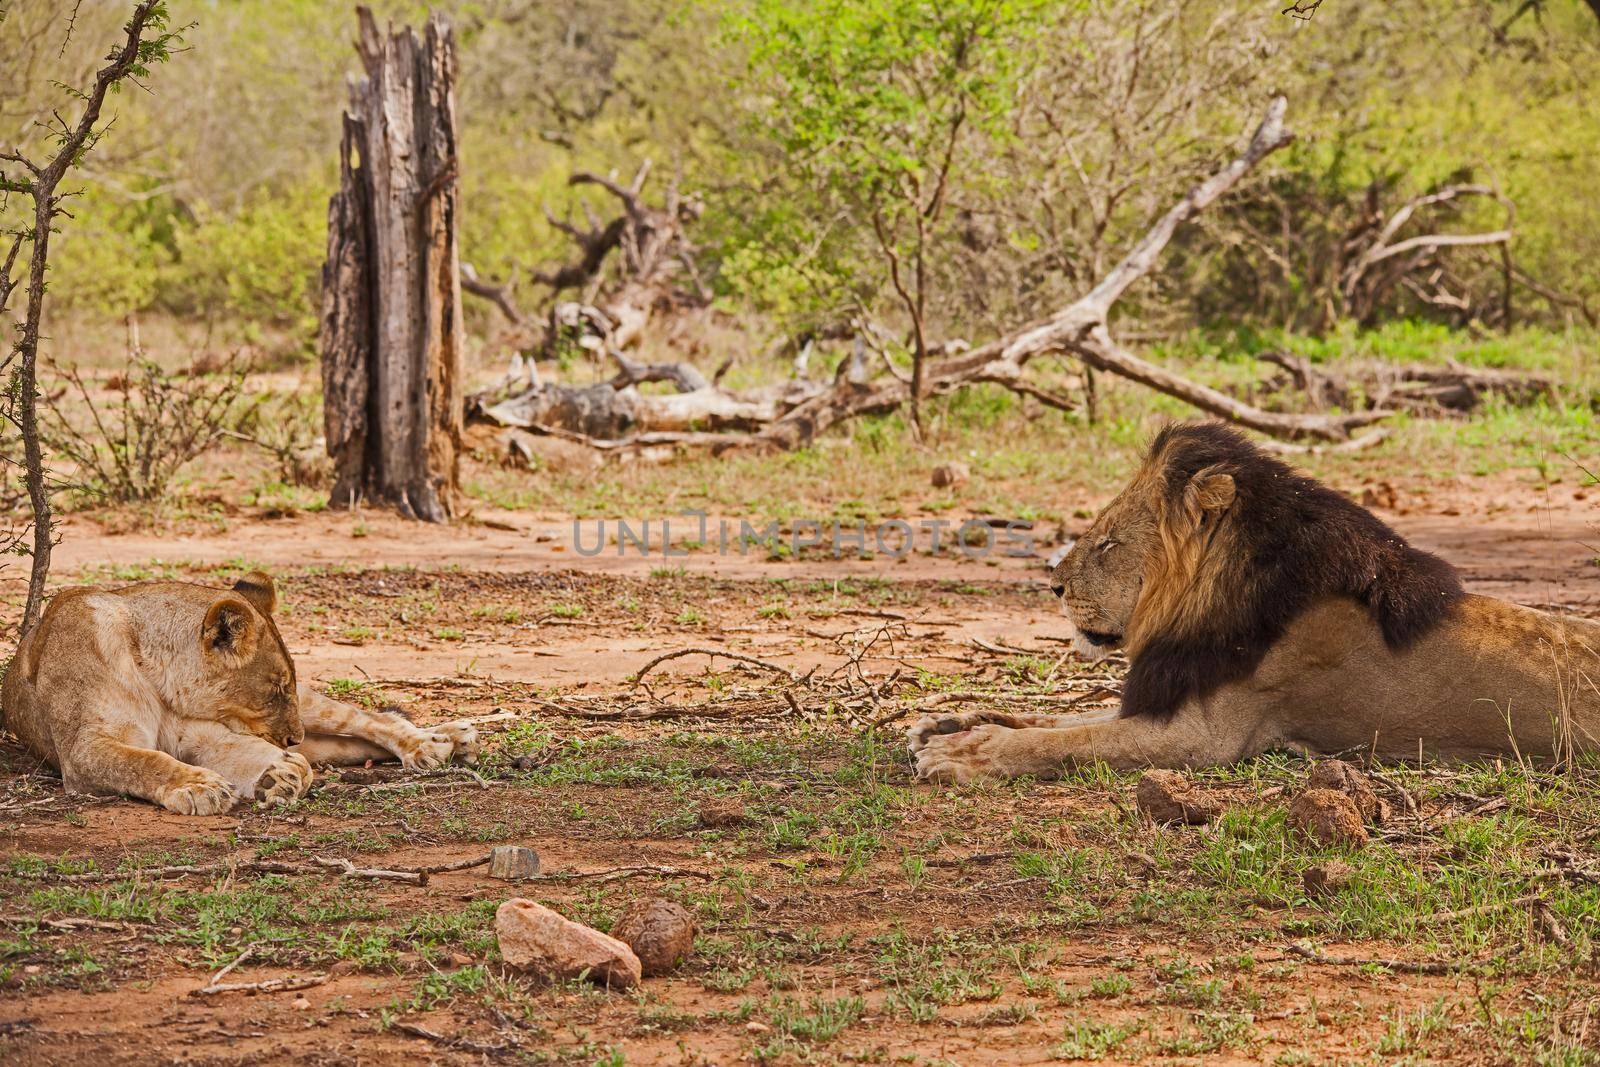 Male and Female Lion 14815 by kobus_peche